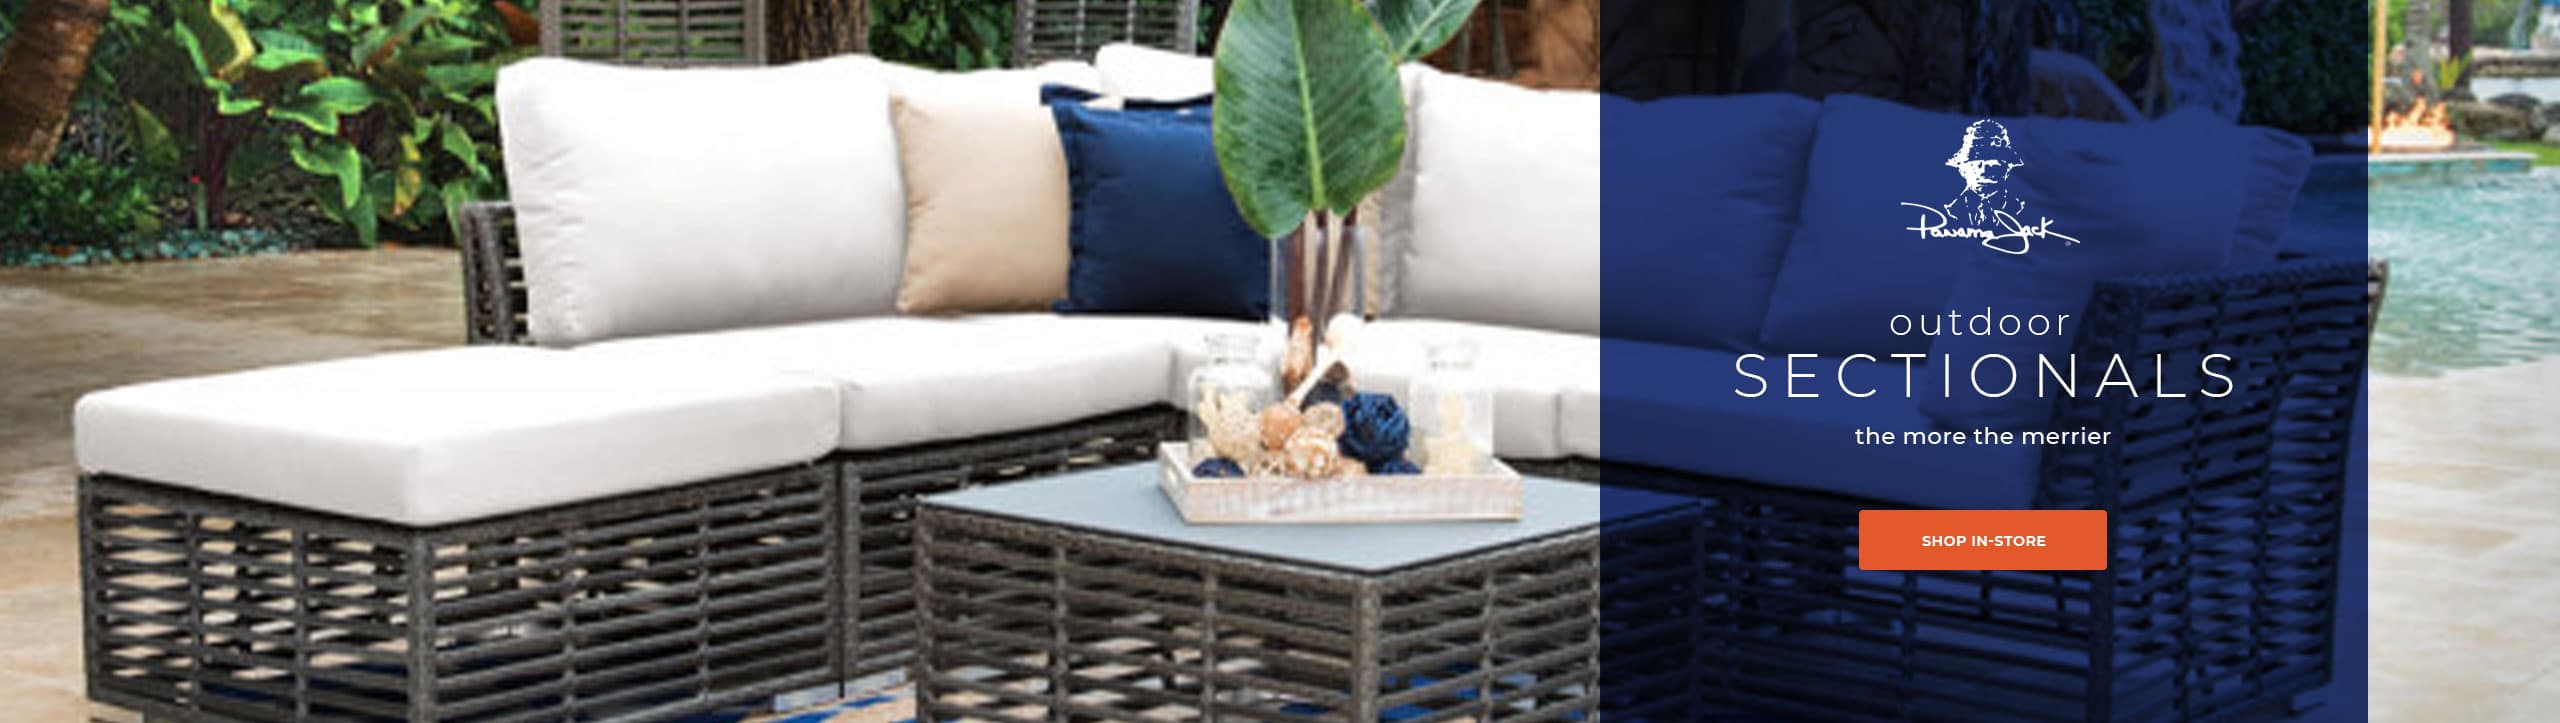 Outdoor Sectionals by Panama Jack - Shop Instore